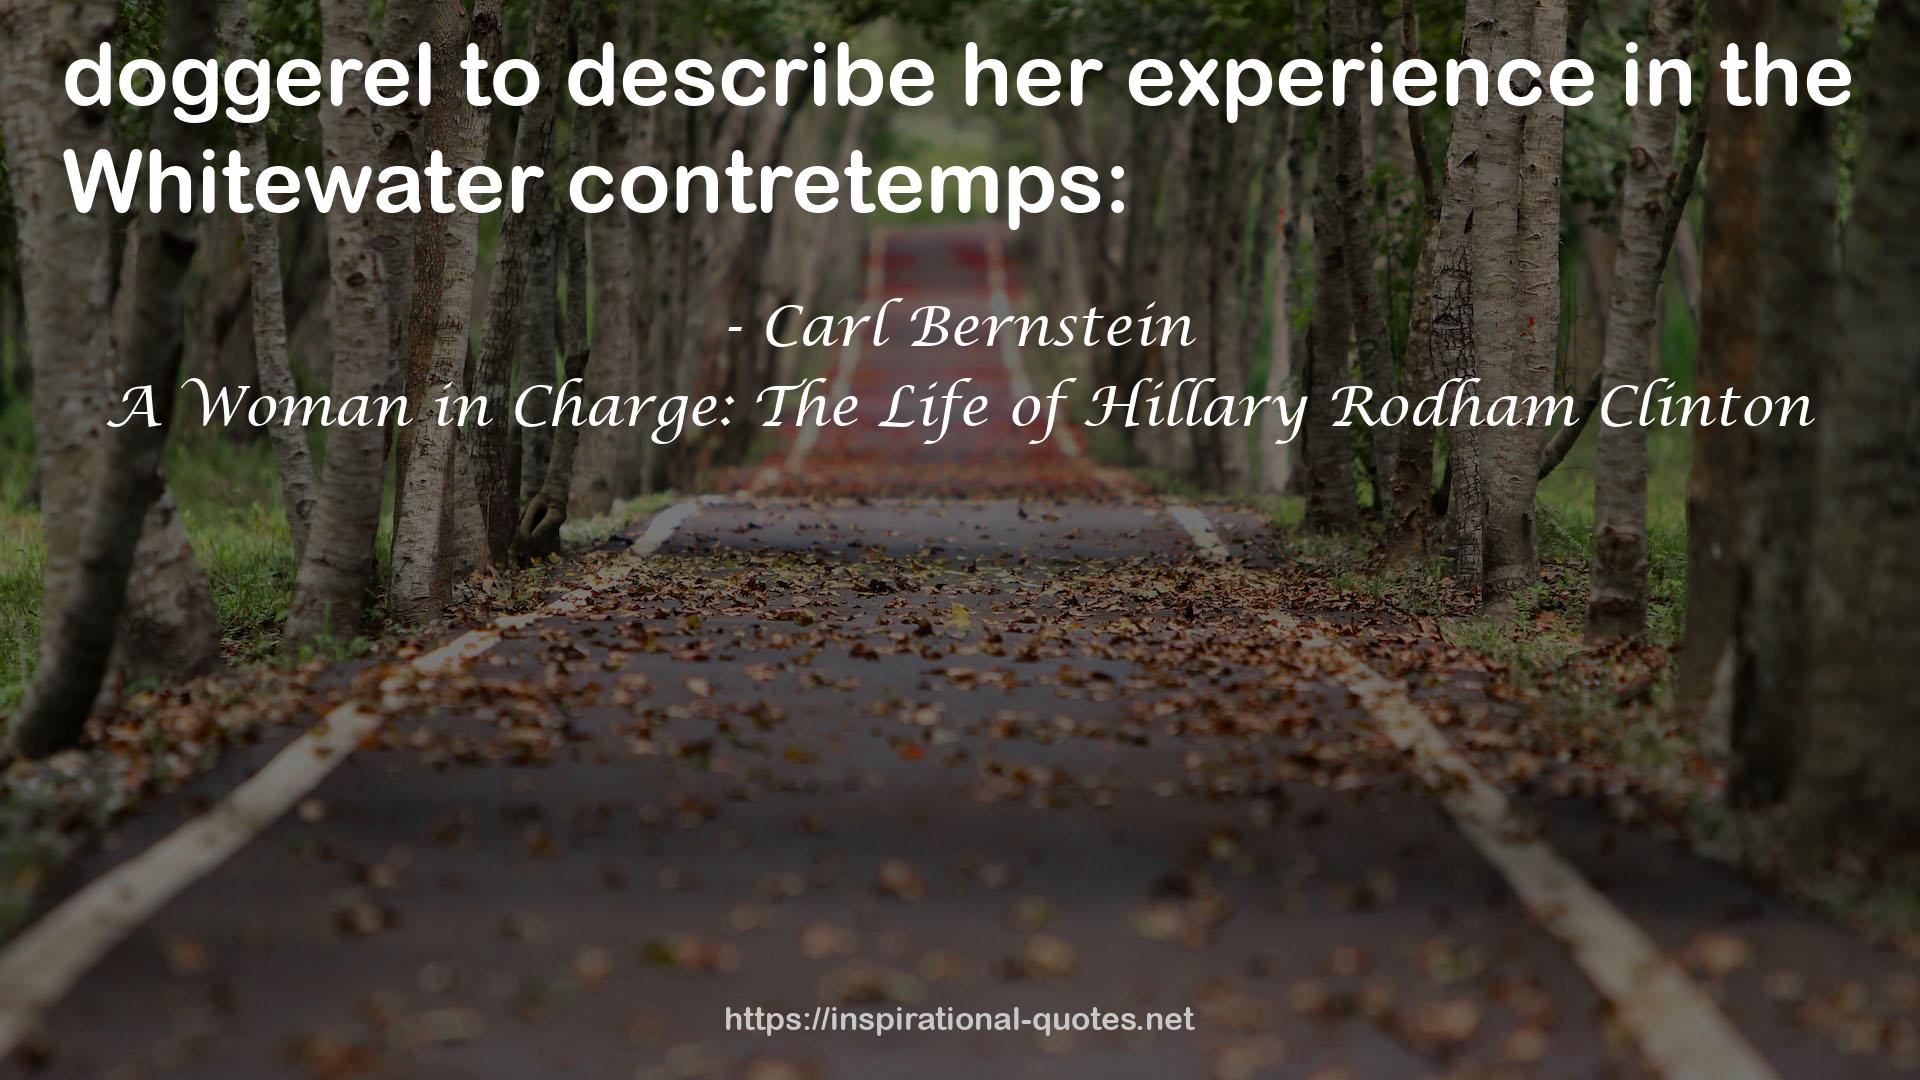 A Woman in Charge: The Life of Hillary Rodham Clinton QUOTES